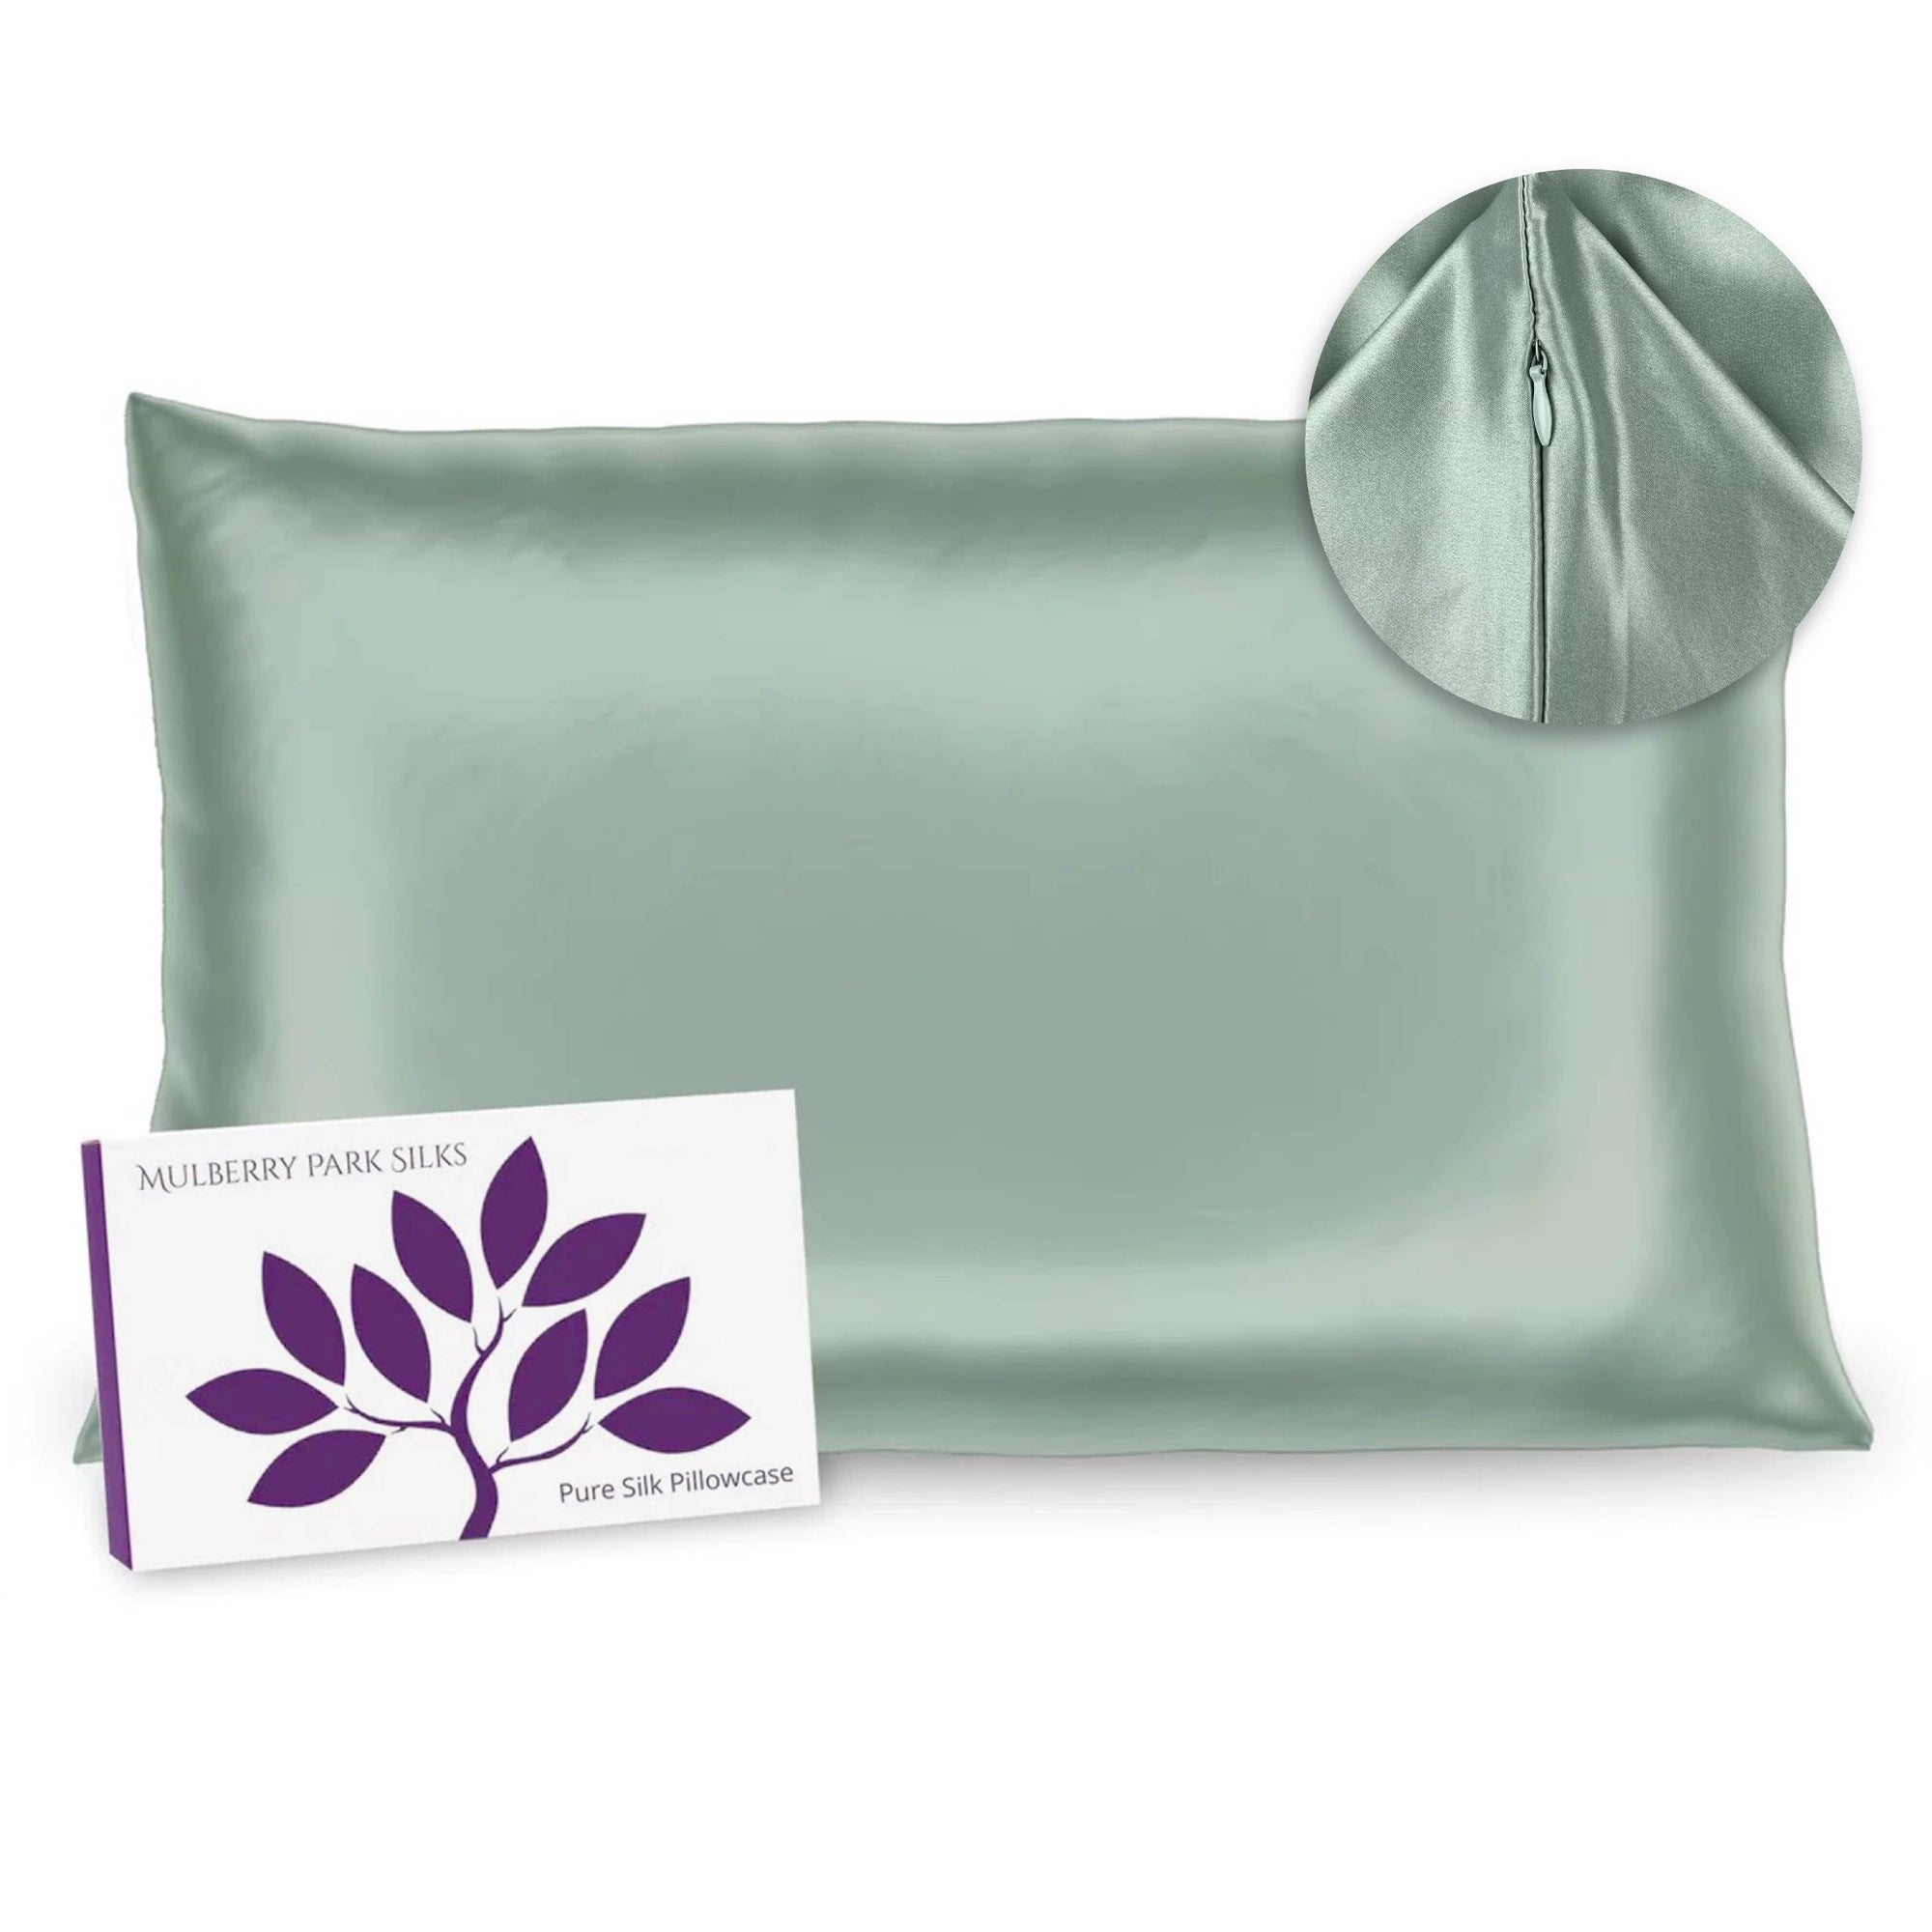 Mulberry Park Silks Deluxe 19 Momme Pure Silk Pillowcase in Green Color with Box